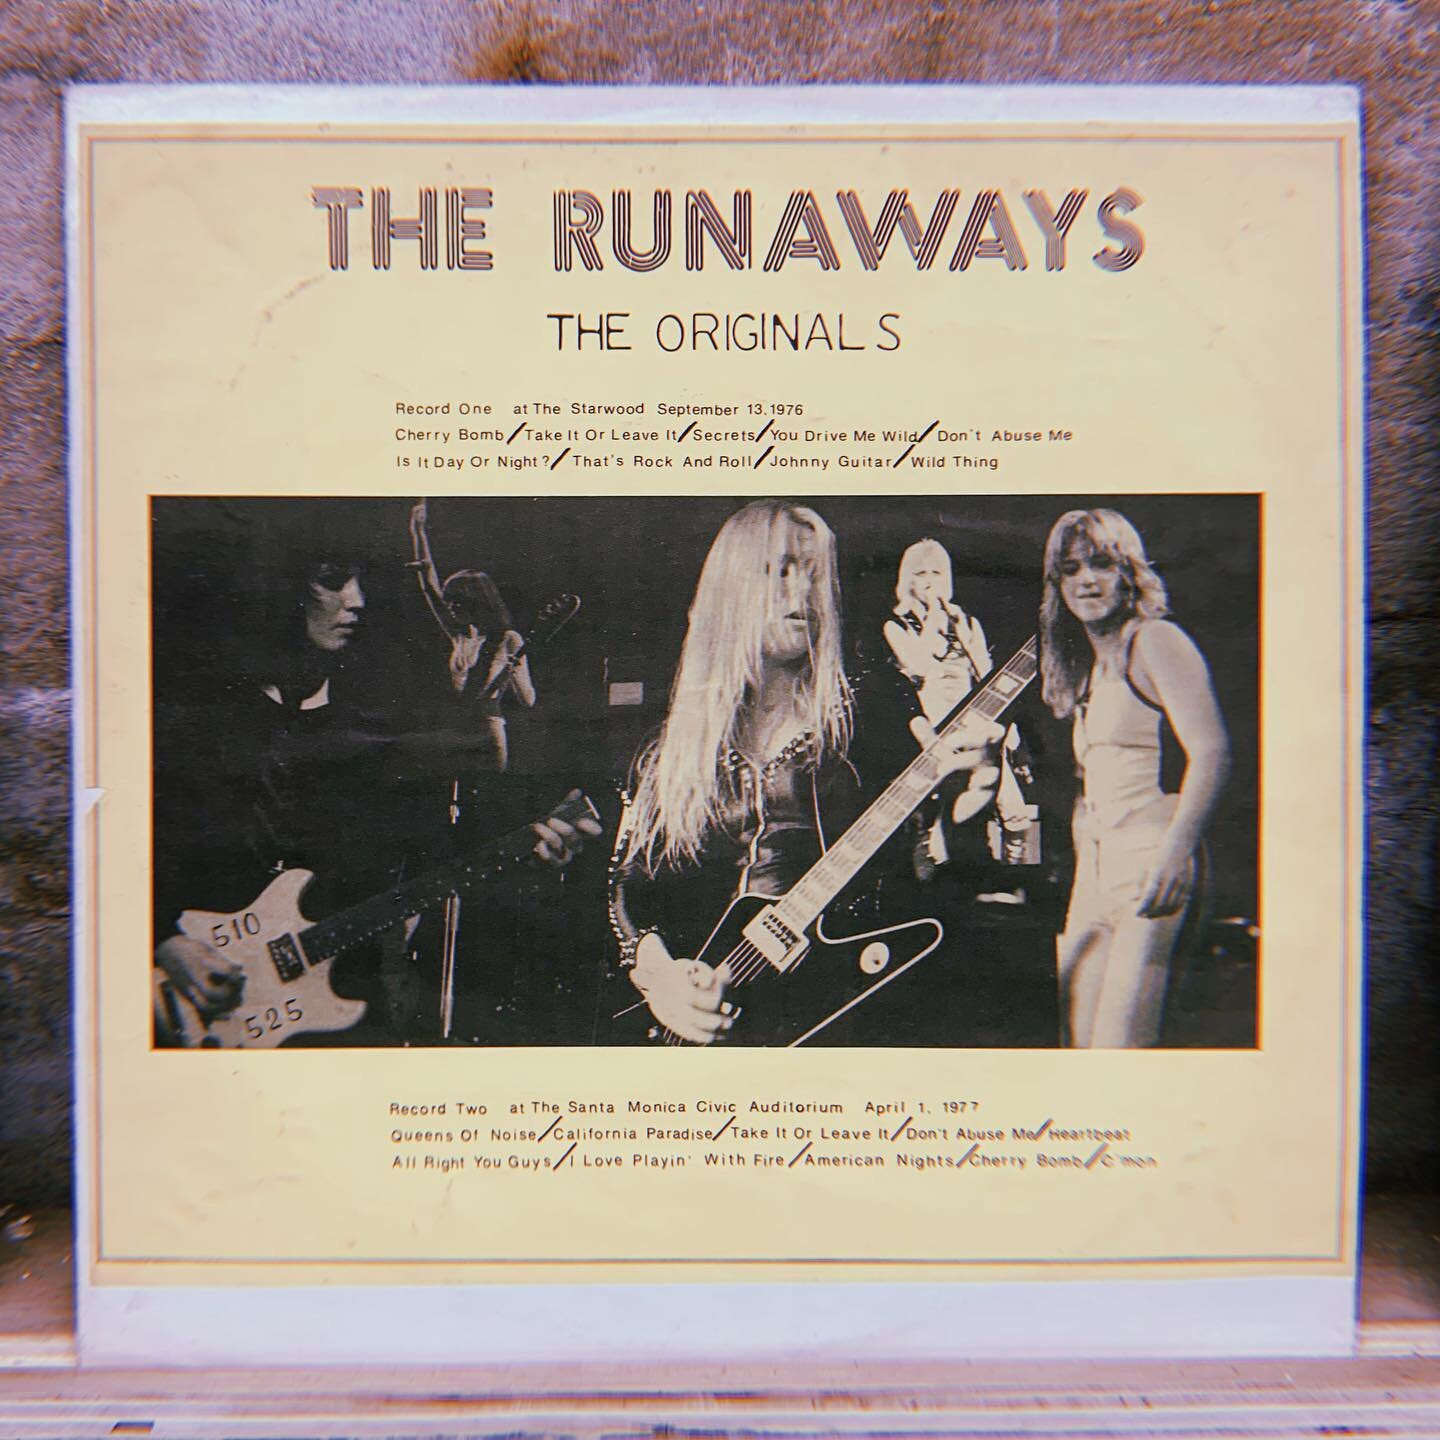 Had some super sick vintage finds lately, and this is one of my favorites. An ultra-rare bootleg compilation from The Runaways, pressed in 1978, 1 of around 500 made. A very, very cool collector&rsquo;s item for the live album lovers among us...this 